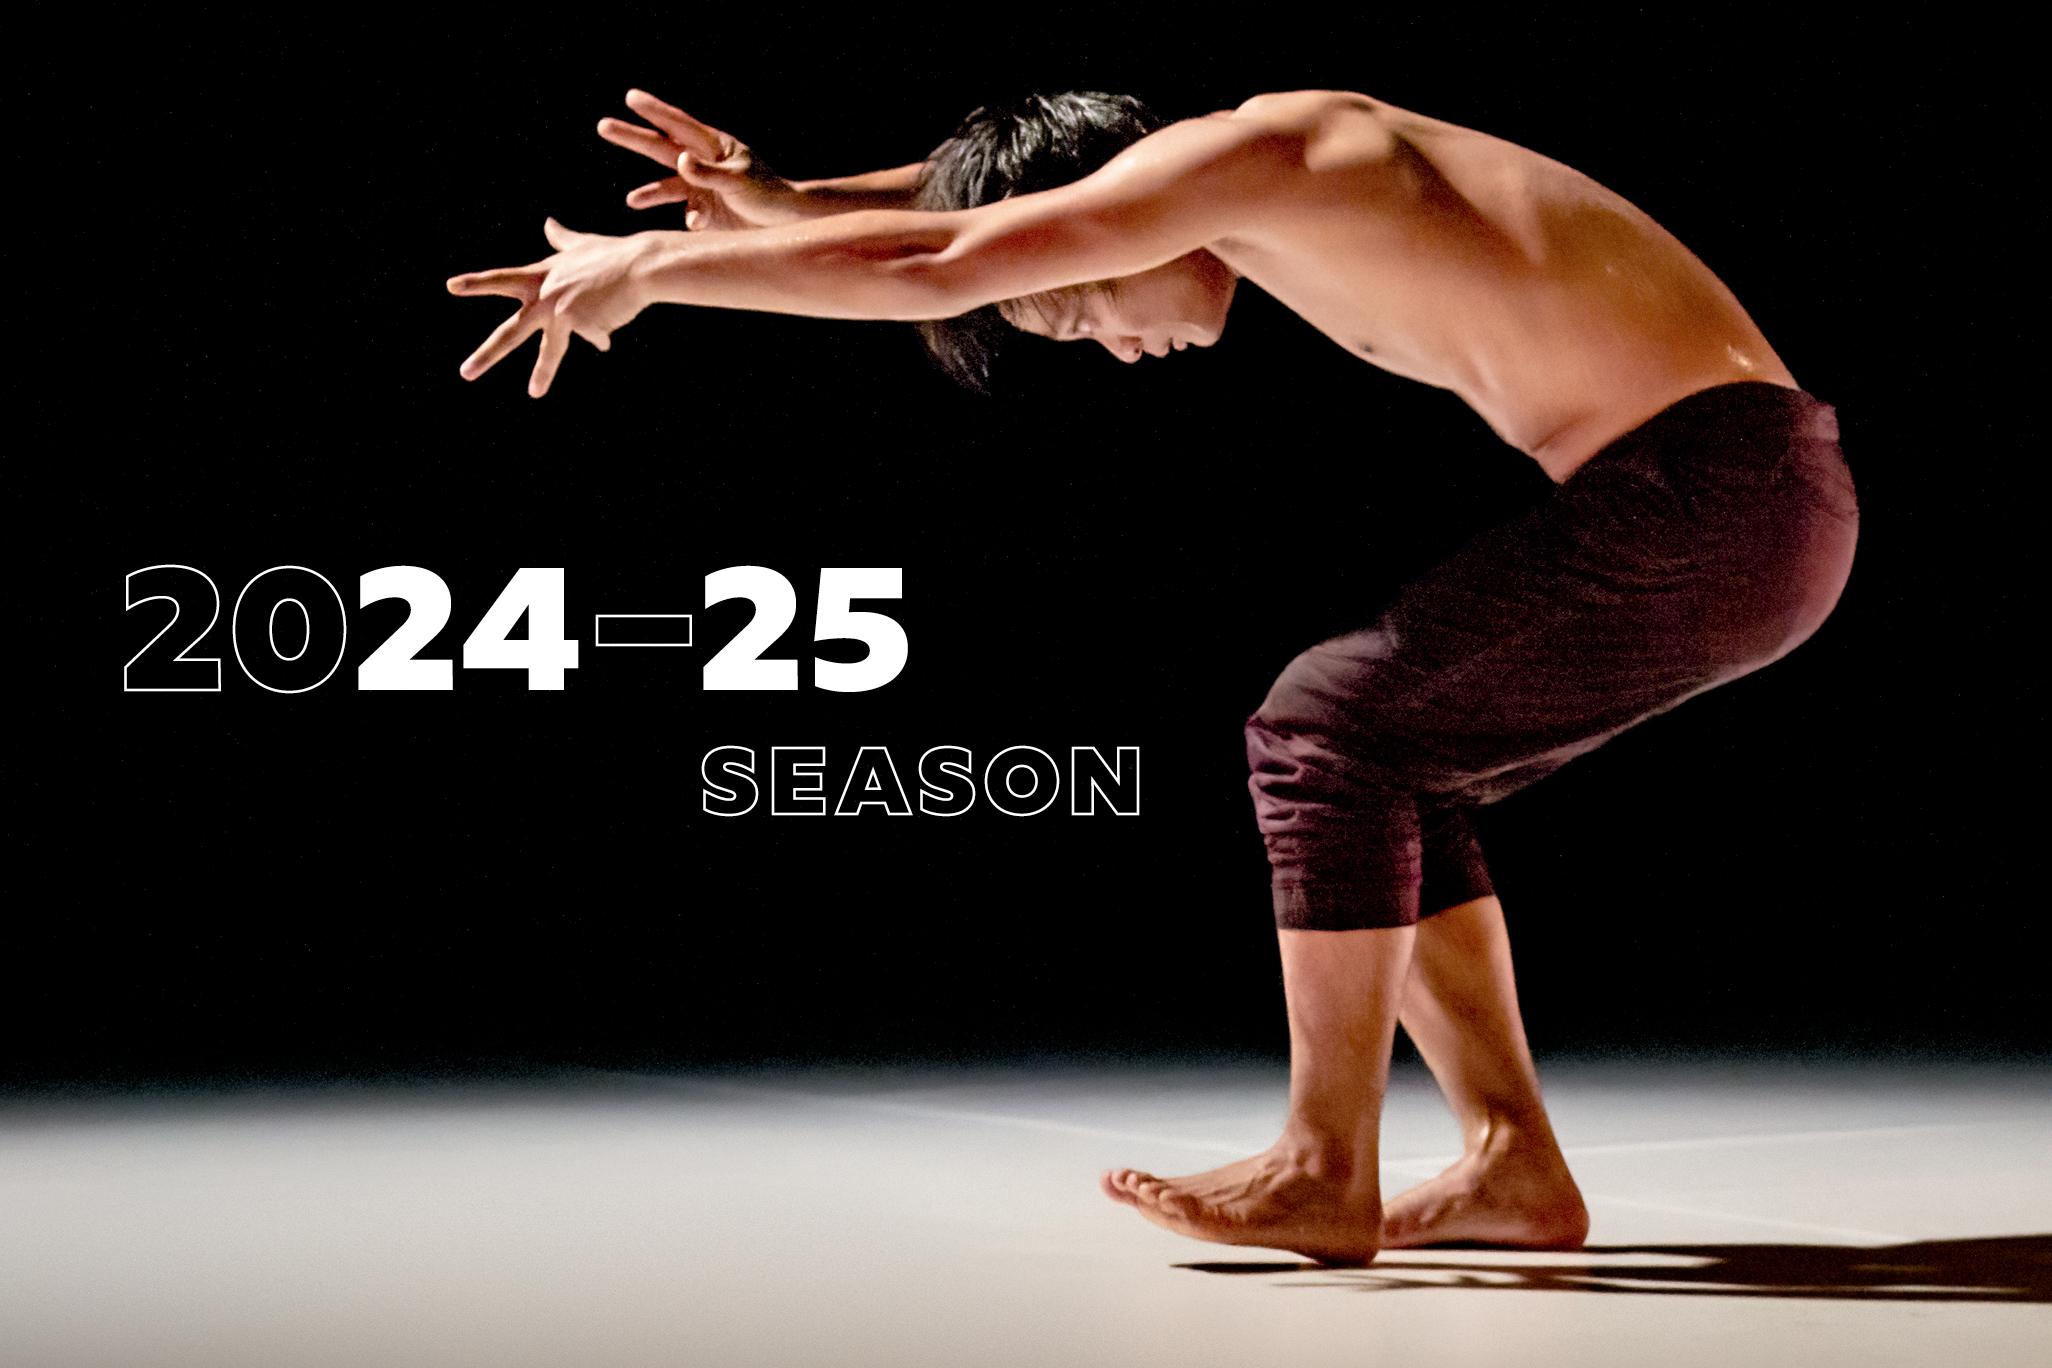 Rianto dances in front of a black backdrop with the words '24-25 season' edited over the image